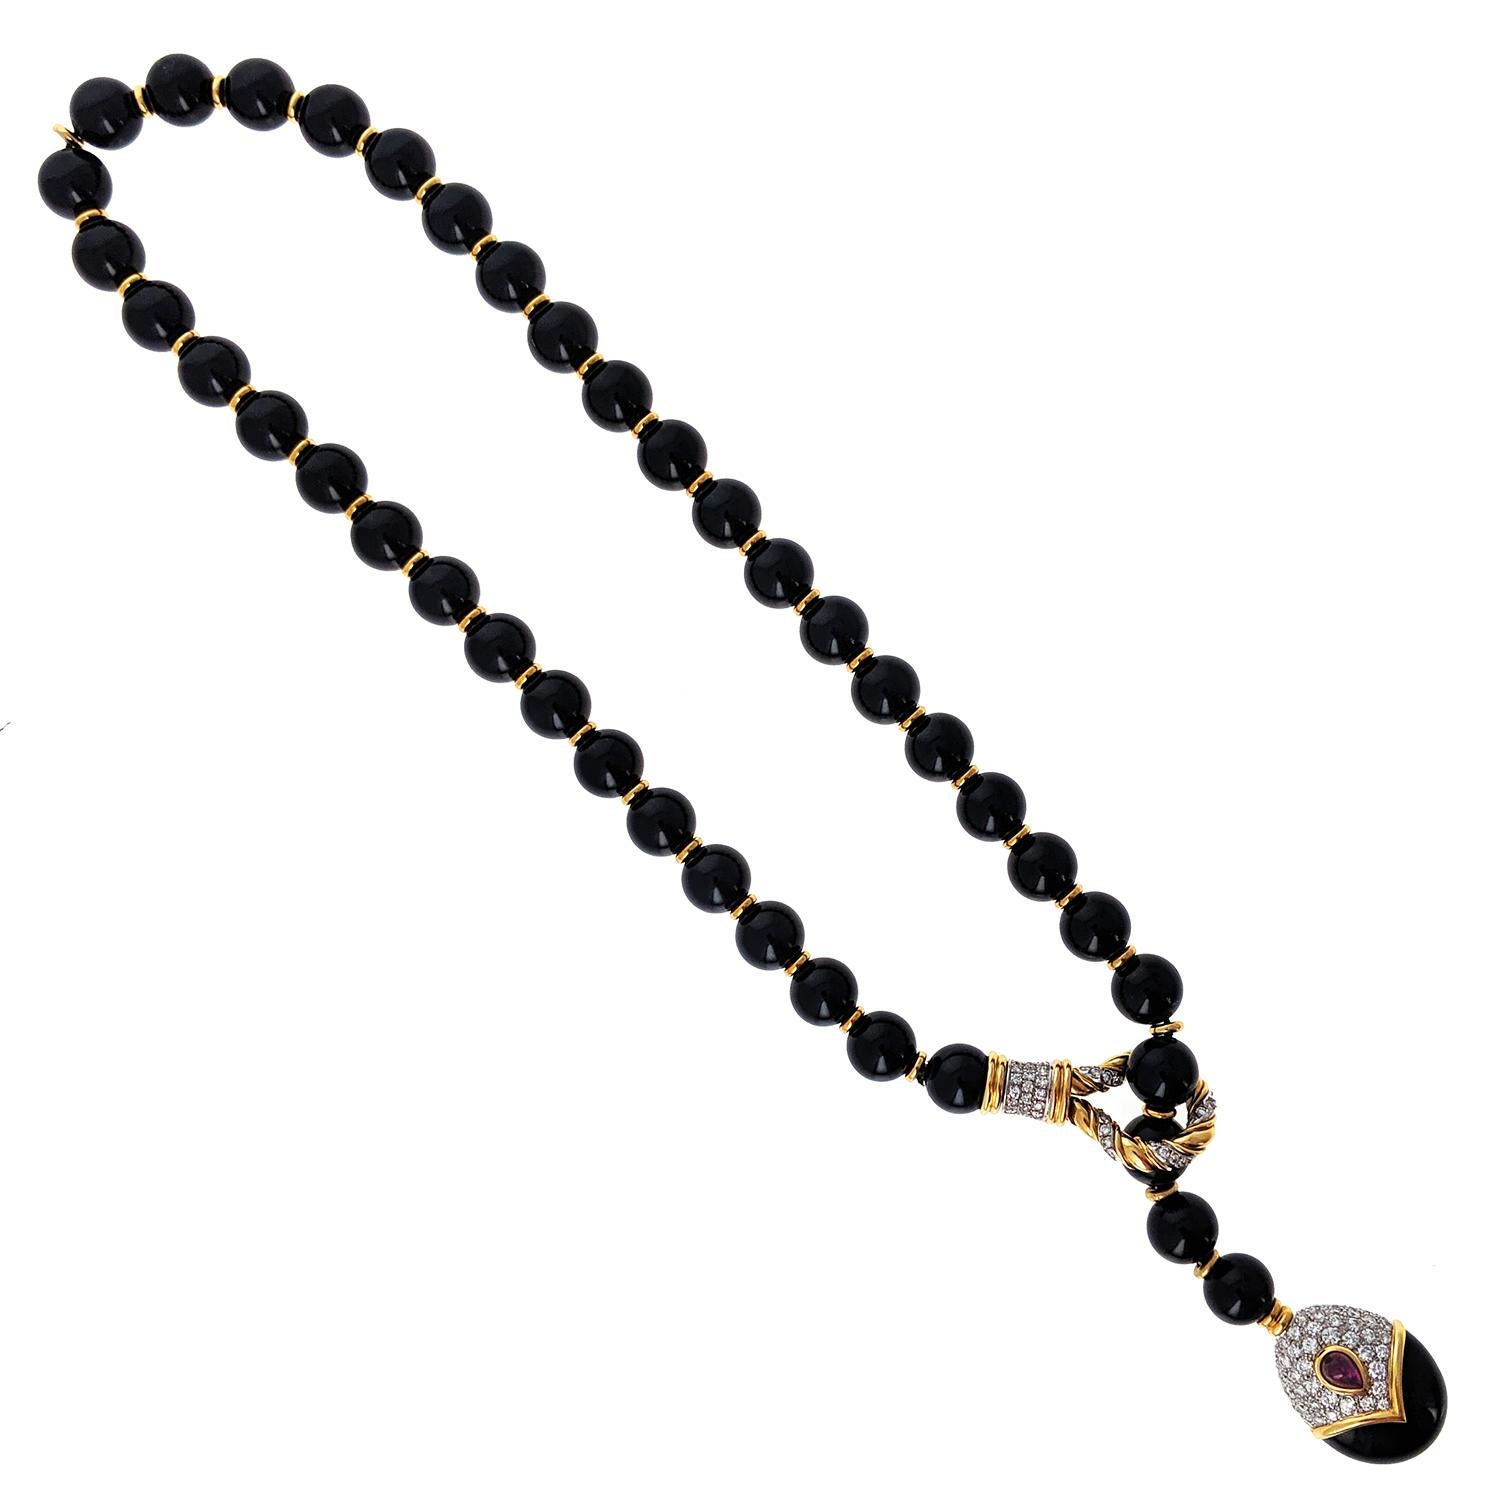 The necklace composed of a row of black jade beads with gold disc spacers, with one side passing through a gold torsade loop set with brilliant-cut diamonds, to the egg-shaped terminal in onyx and diamonds, embellished with a pear-shaped ruby